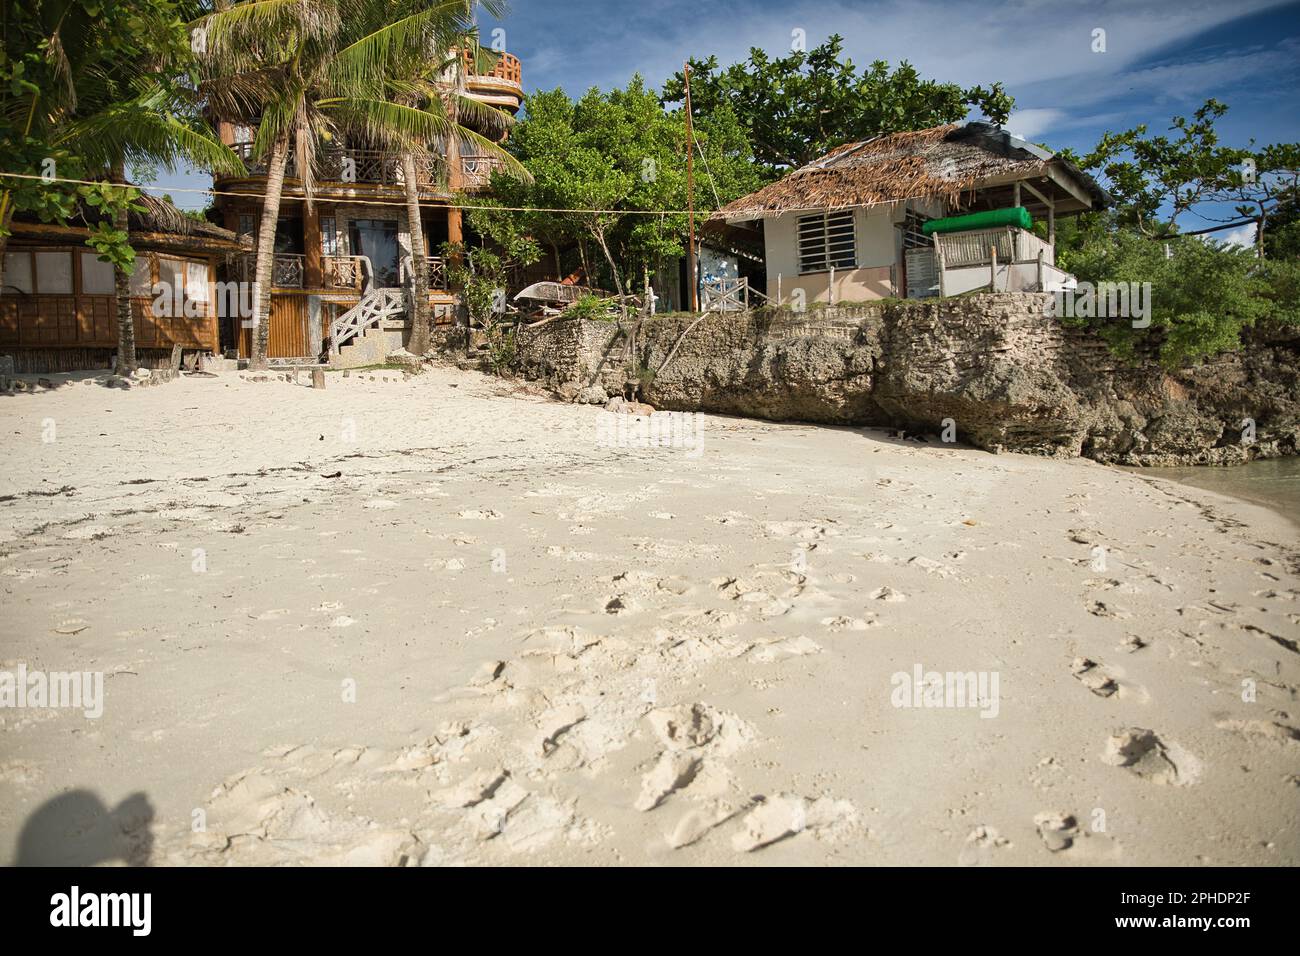 Dreamlike idyllic beach Siquijor in the Philippines with trees, cliffs and huts on the beach. Stock Photo